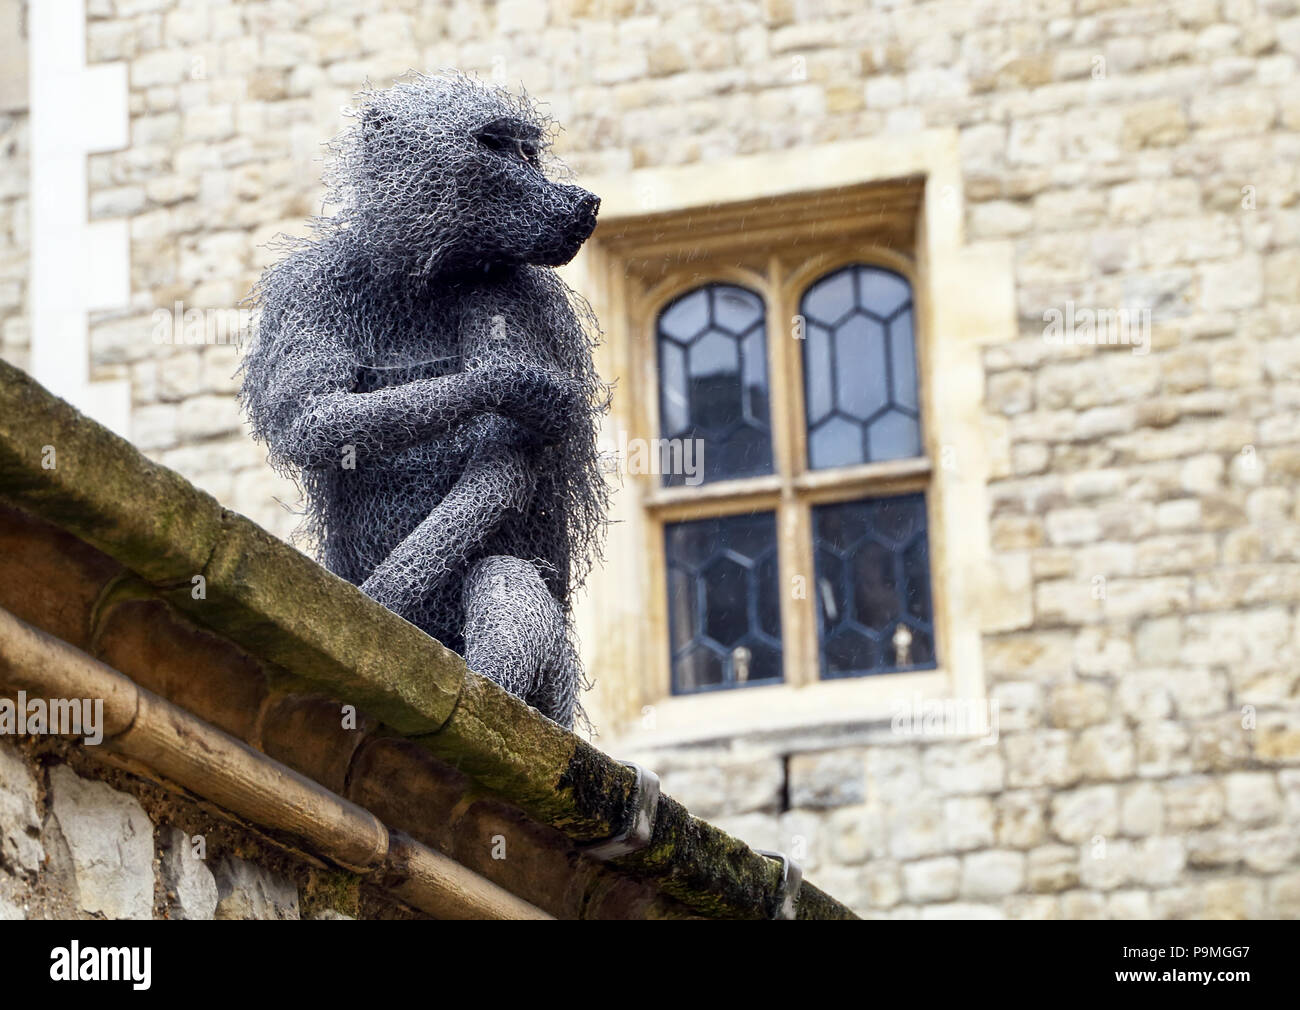 Wire animal sculptures at the Tower of London created by sculptor Kendra Haste, are a nod to the heritage of the Tower. Medieval Kings around Europe u Stock Photo